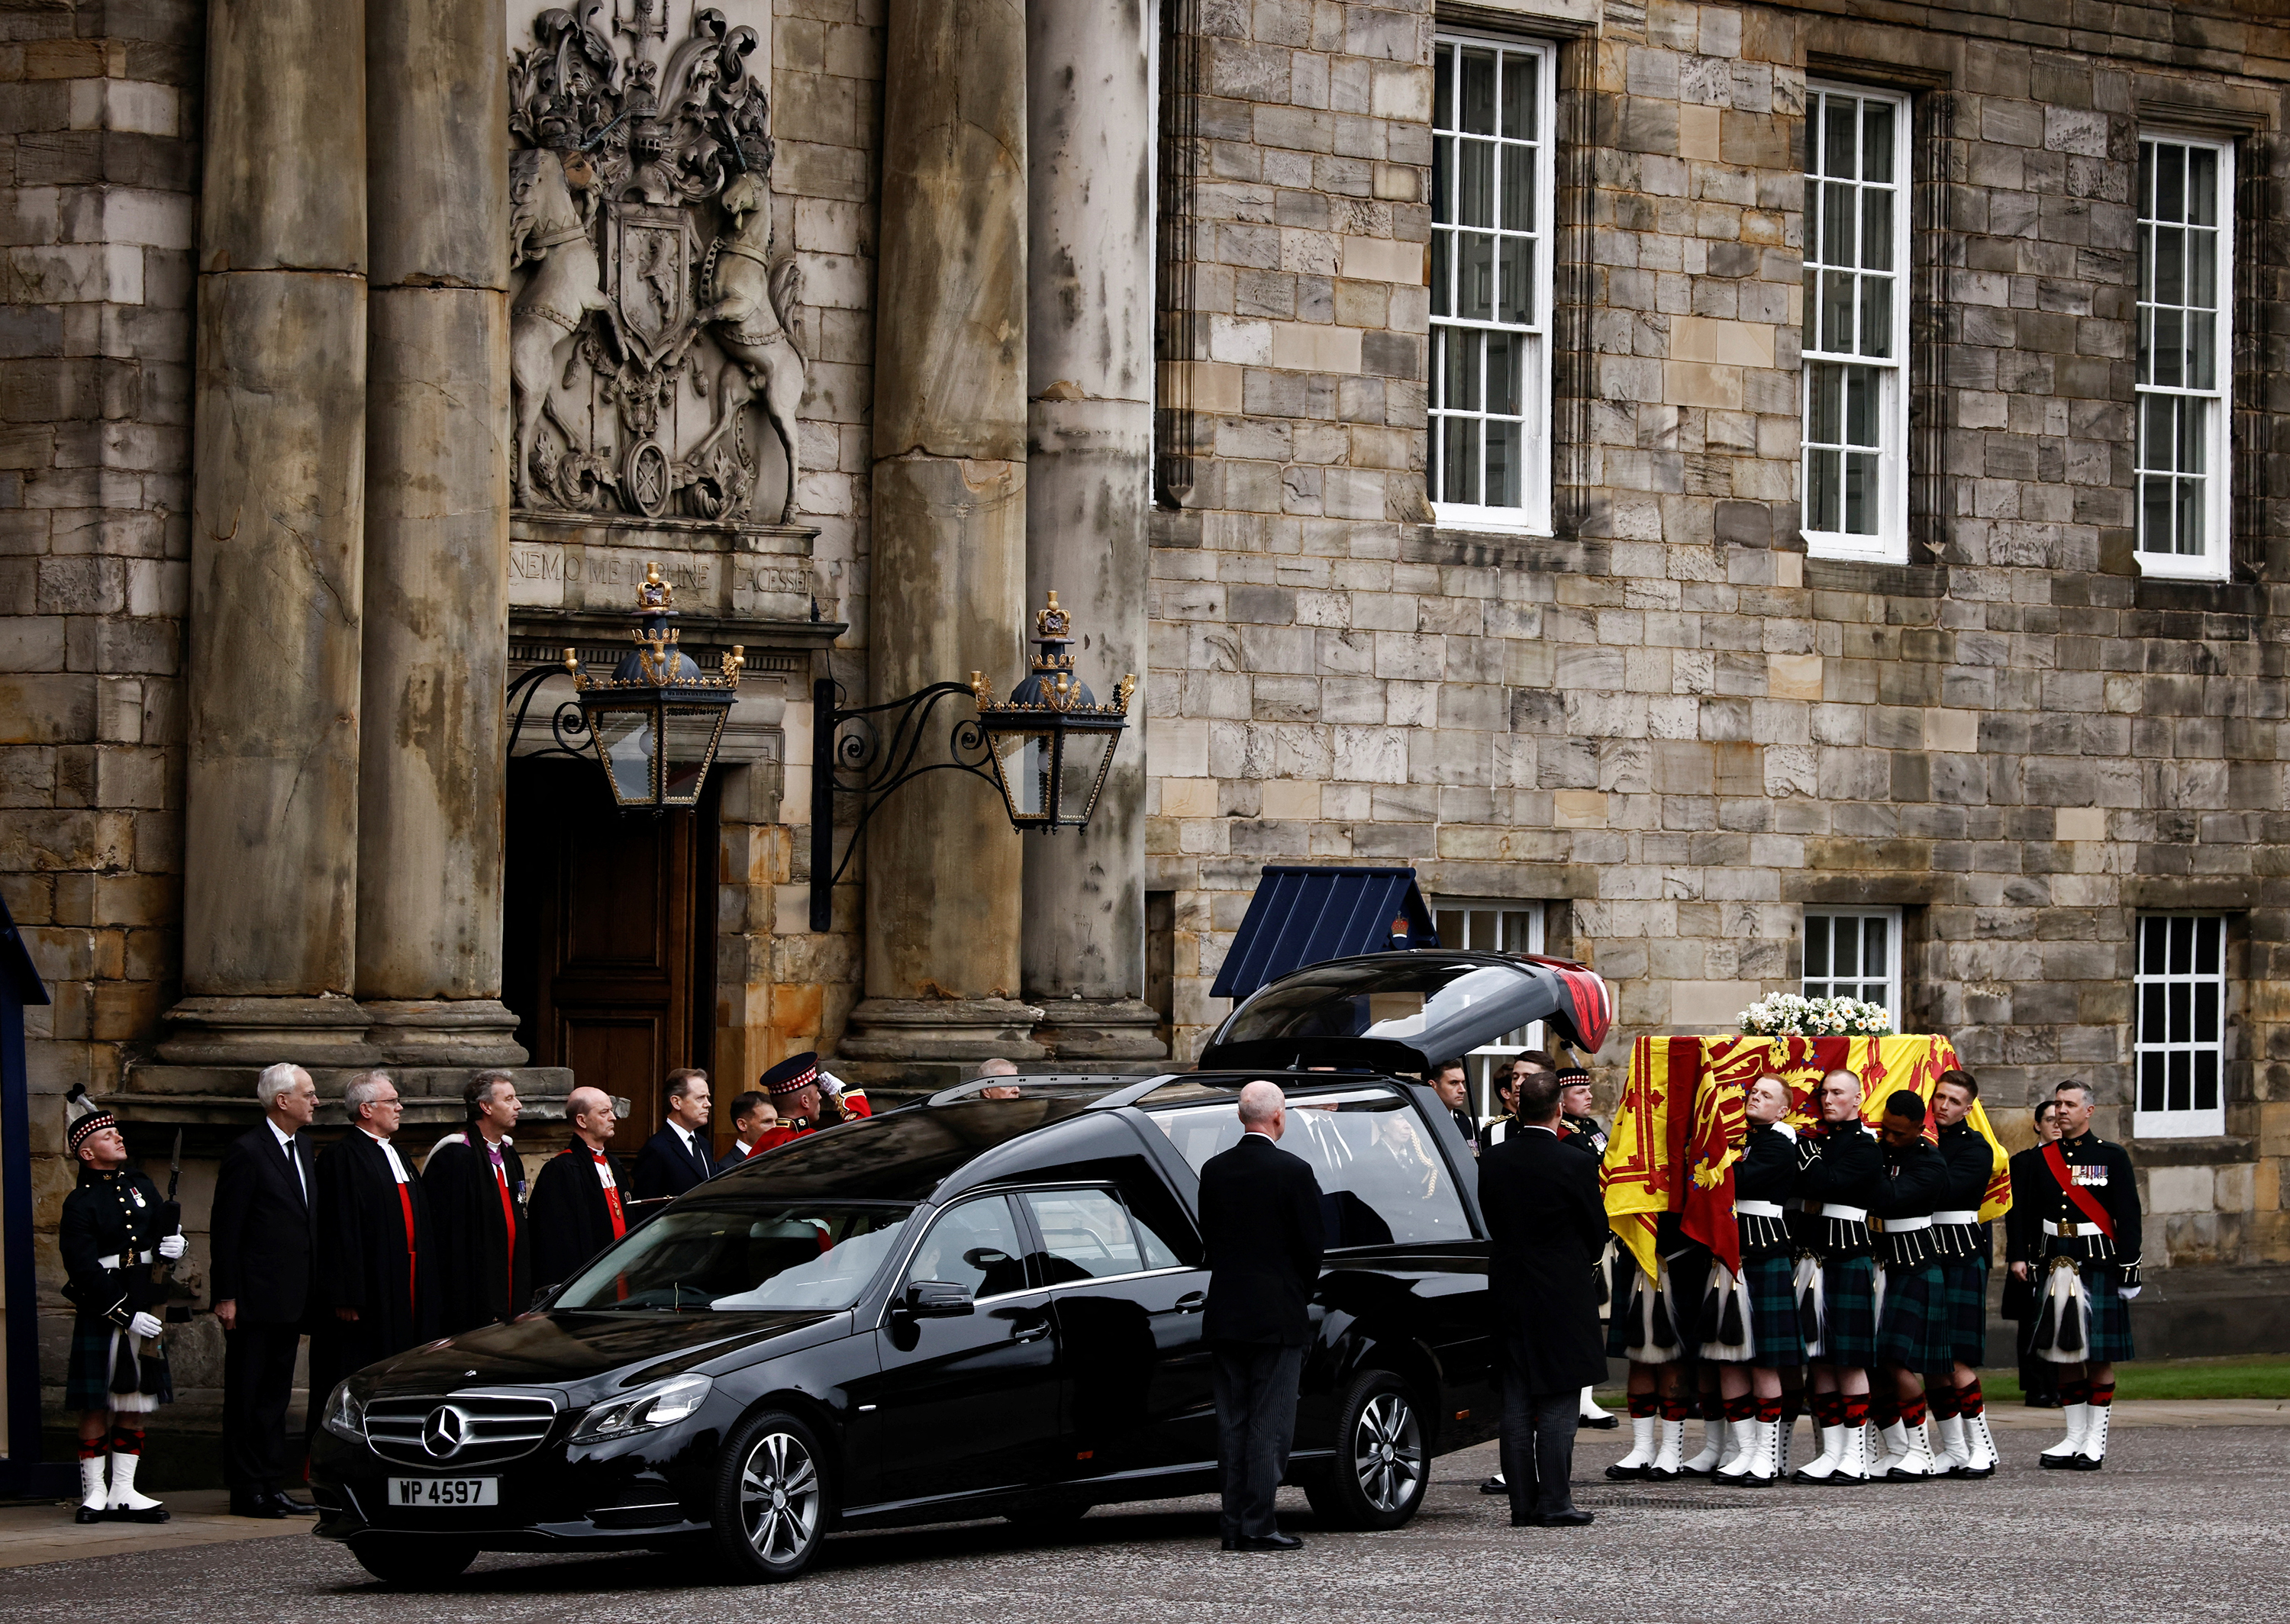 Pallbearers carry the coffin of Britain's Queen Elizabeth II as the hearse arrives at the Palace of Holyroodhouse in Edinburgh, Scotland, Britain, on September 11.